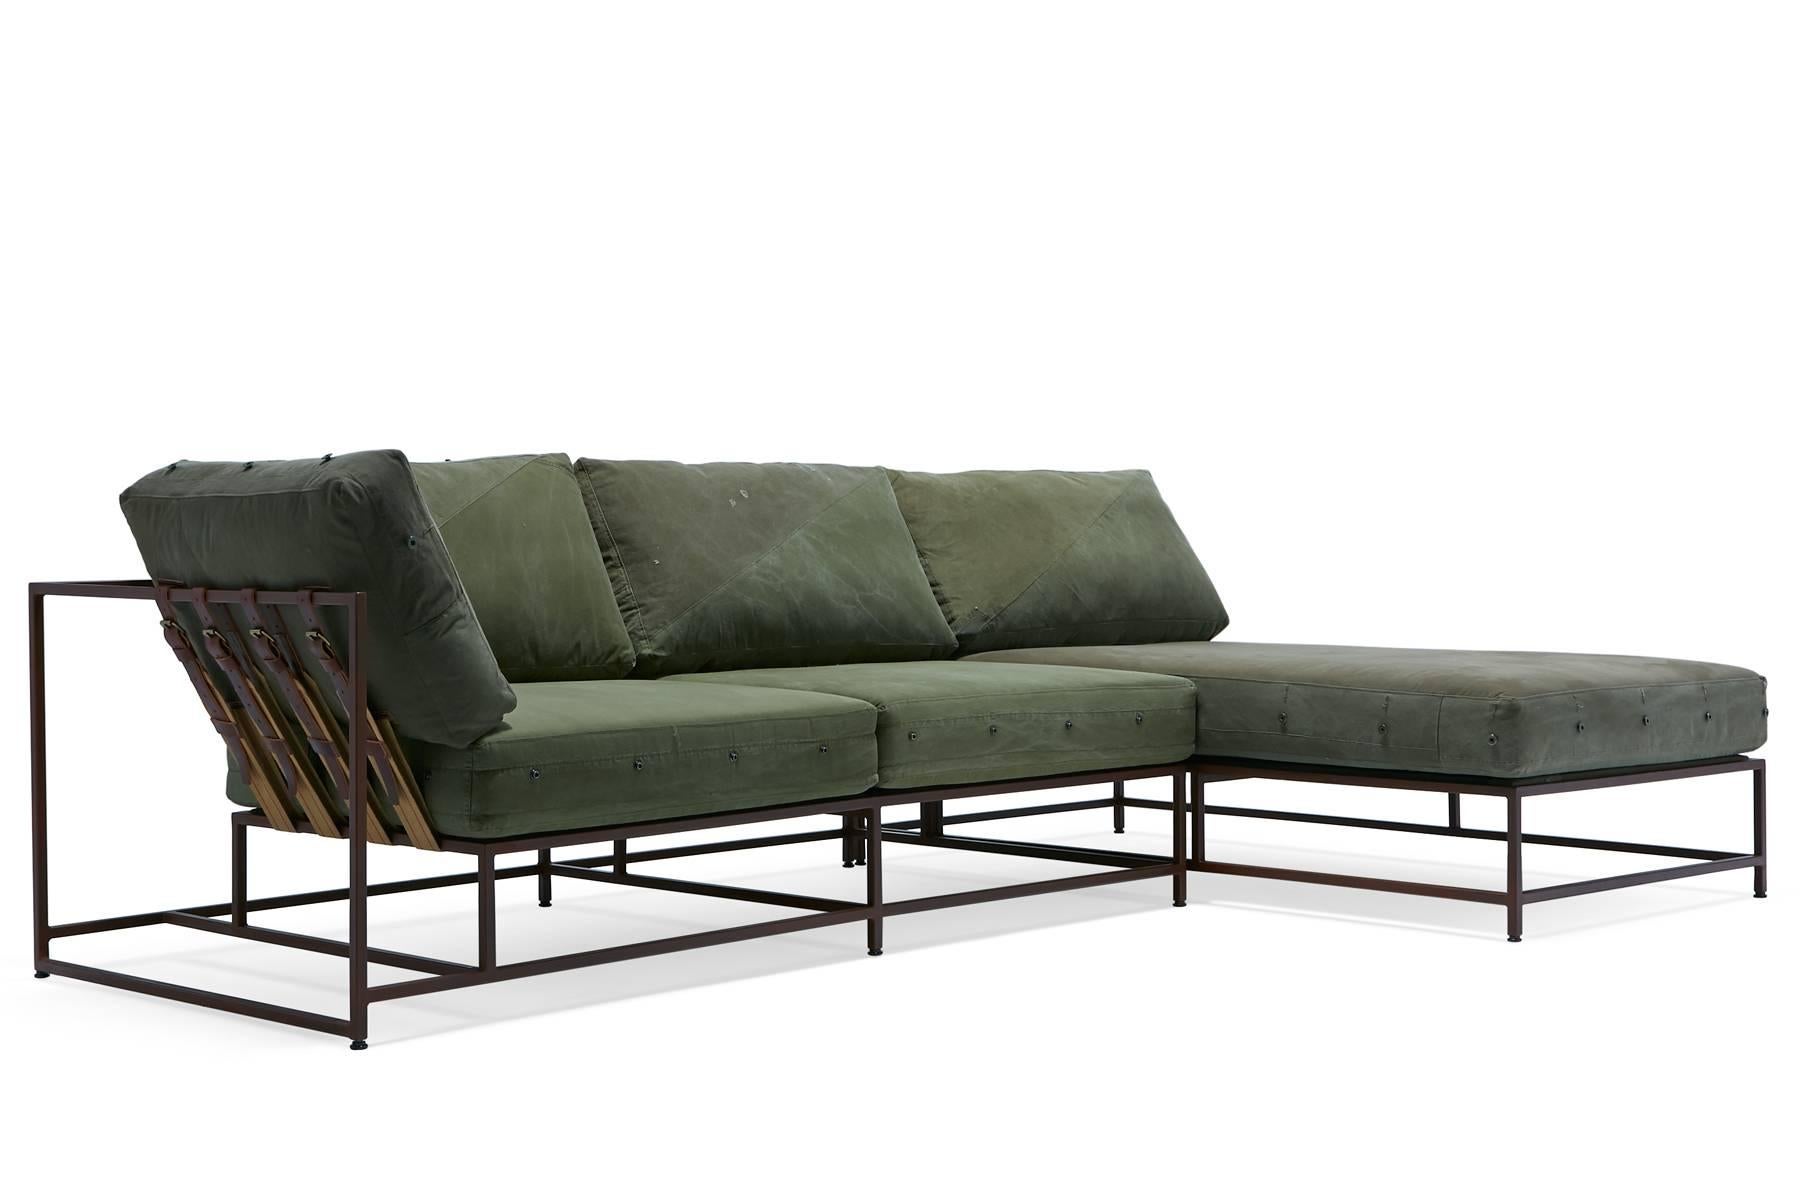 A sectional version of the Inheritance collection sofa made with military canvas upholstery and a marbled rust frame finish. The belts are made with cotton webbing, oxblood brown leather and antique brass buckles. This design is made in two pieces